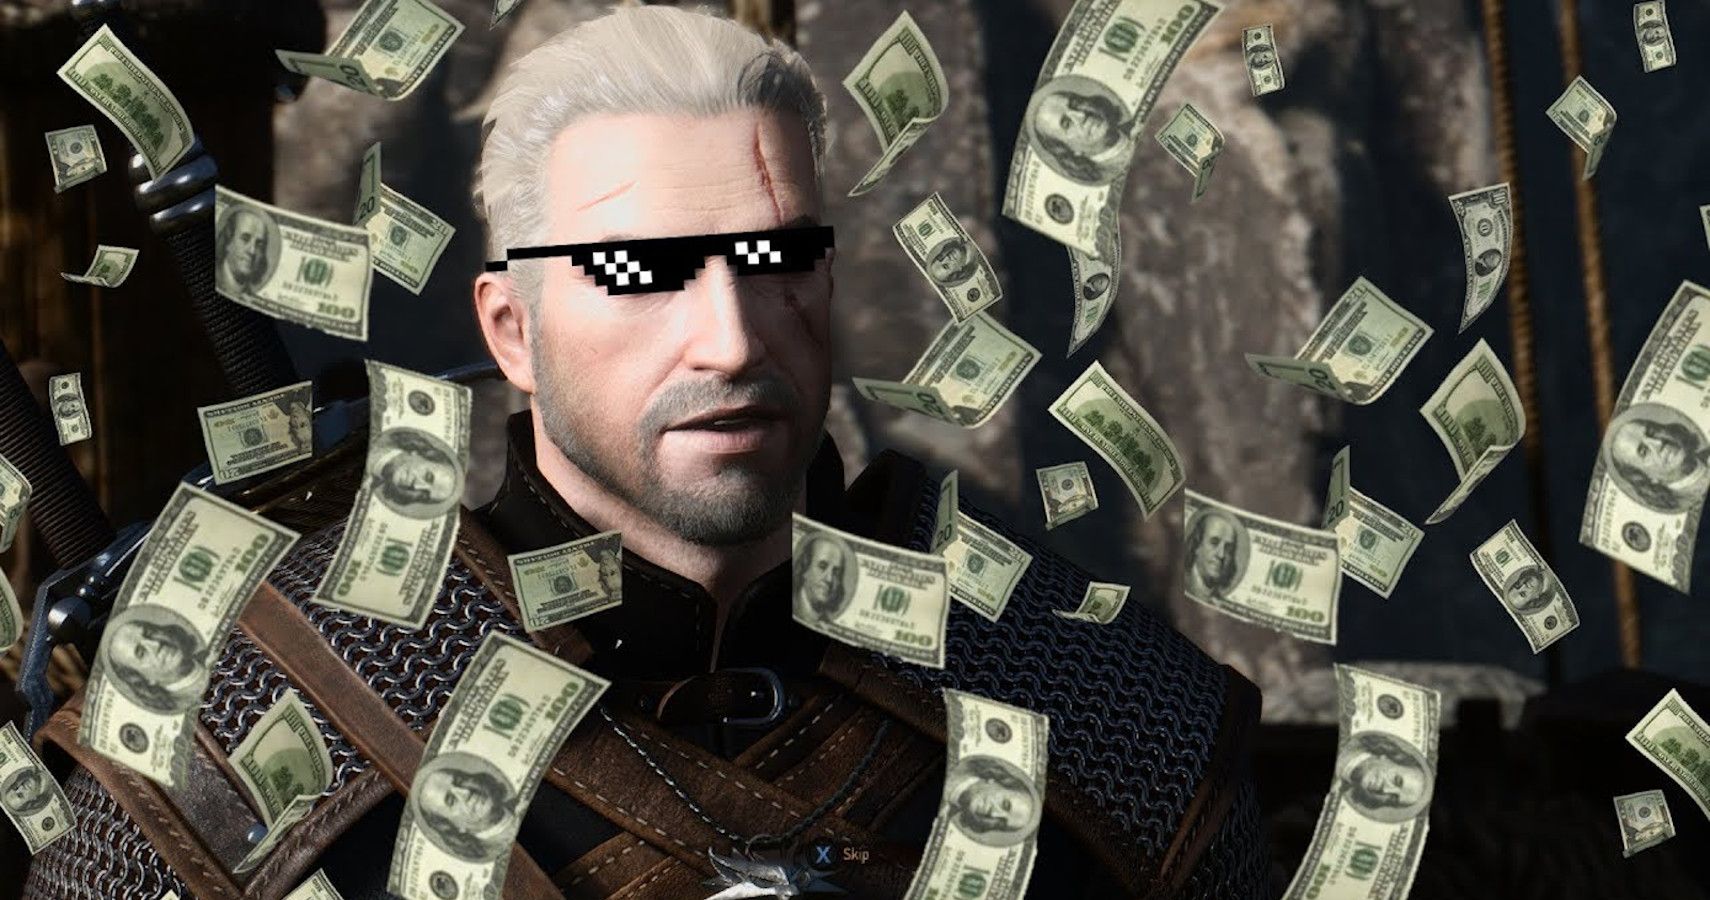 witcher 3 merchants with most money